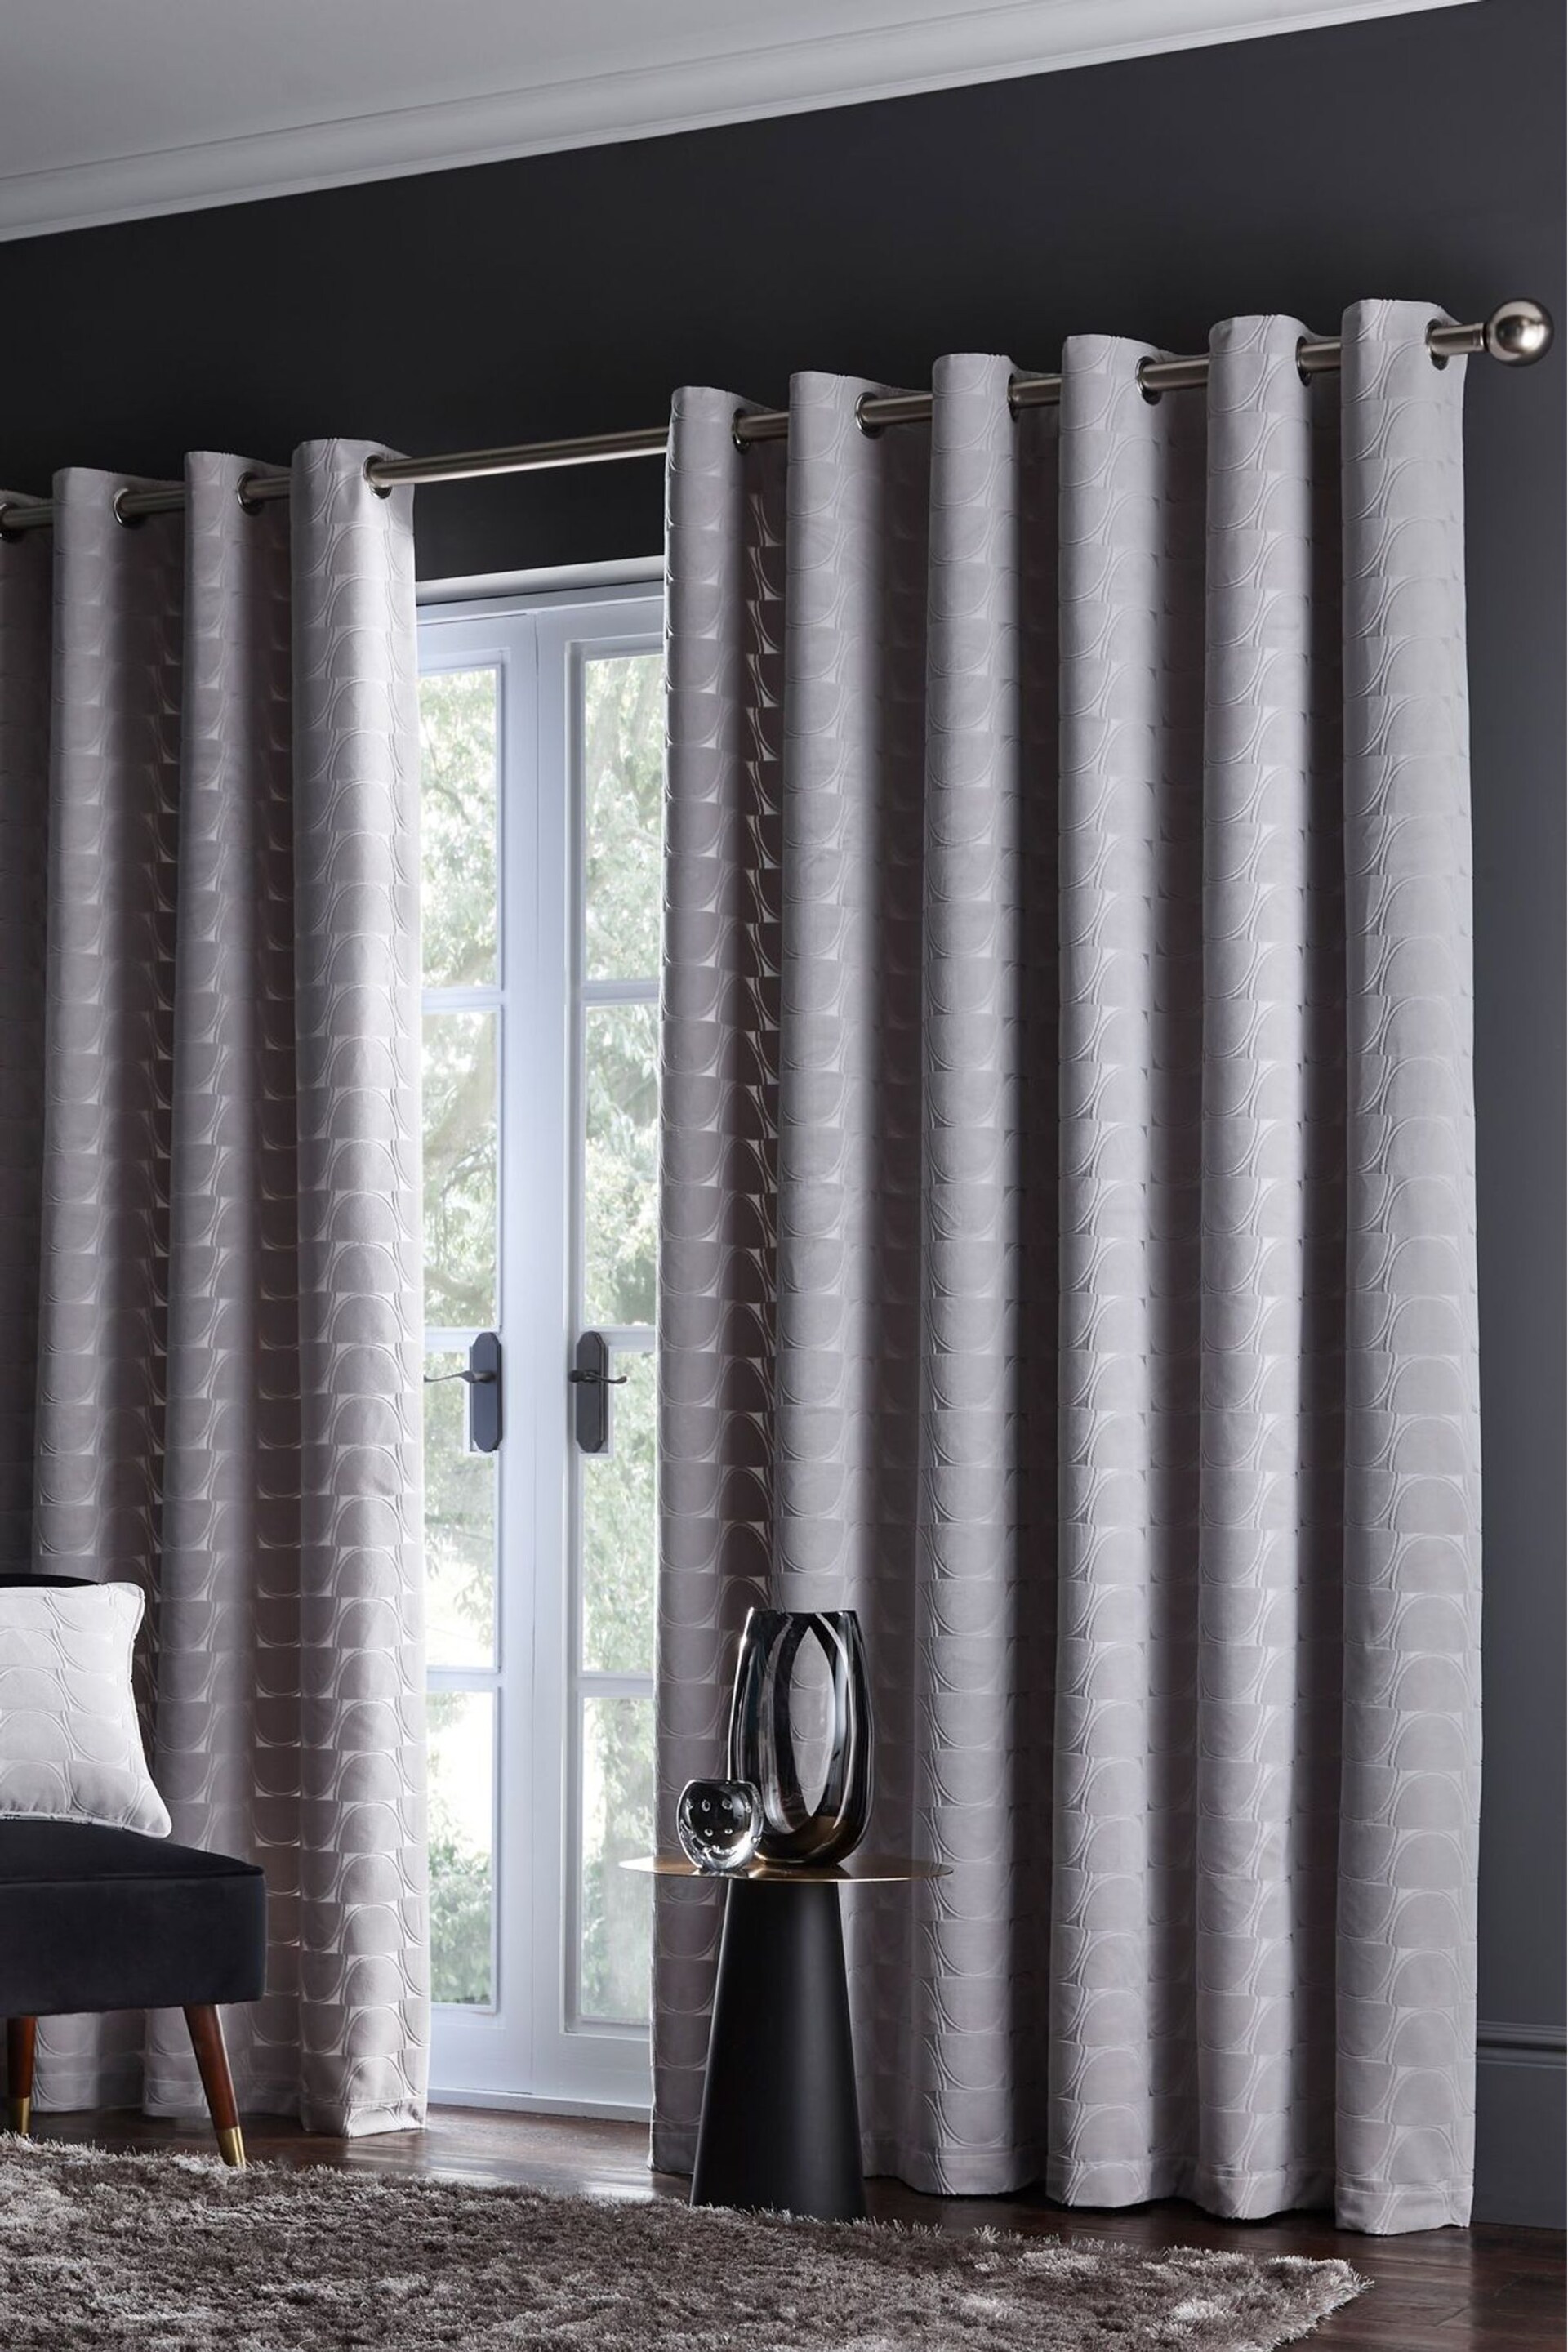 Studio G Silver Lucca Eyelet Curtains - Image 1 of 2